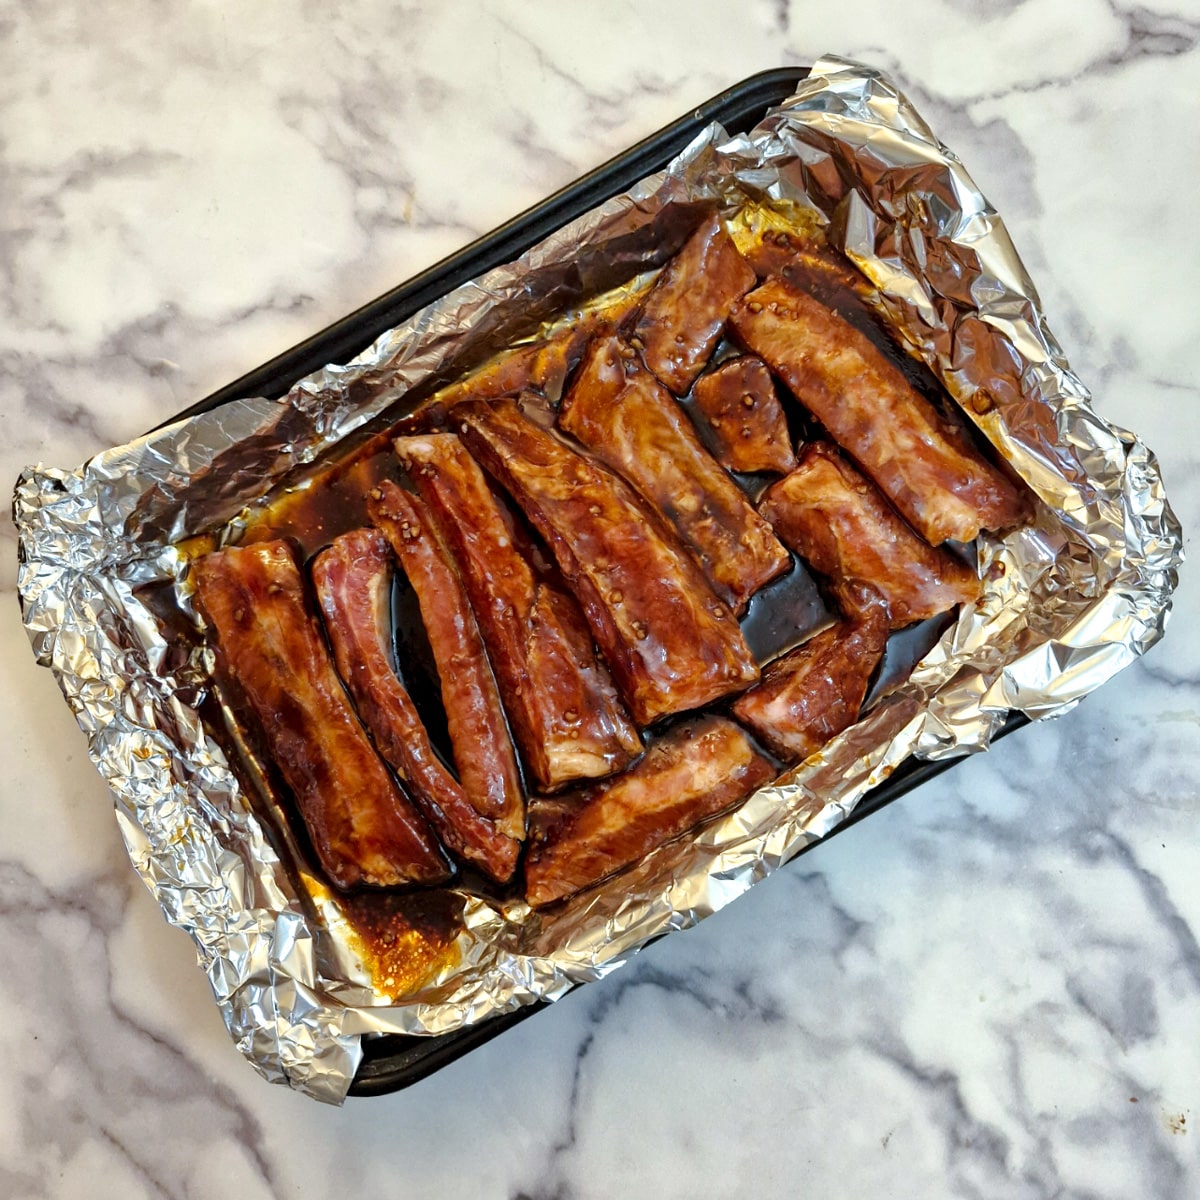 Pork ribs coated with marinade in a foil-lined baking dish.